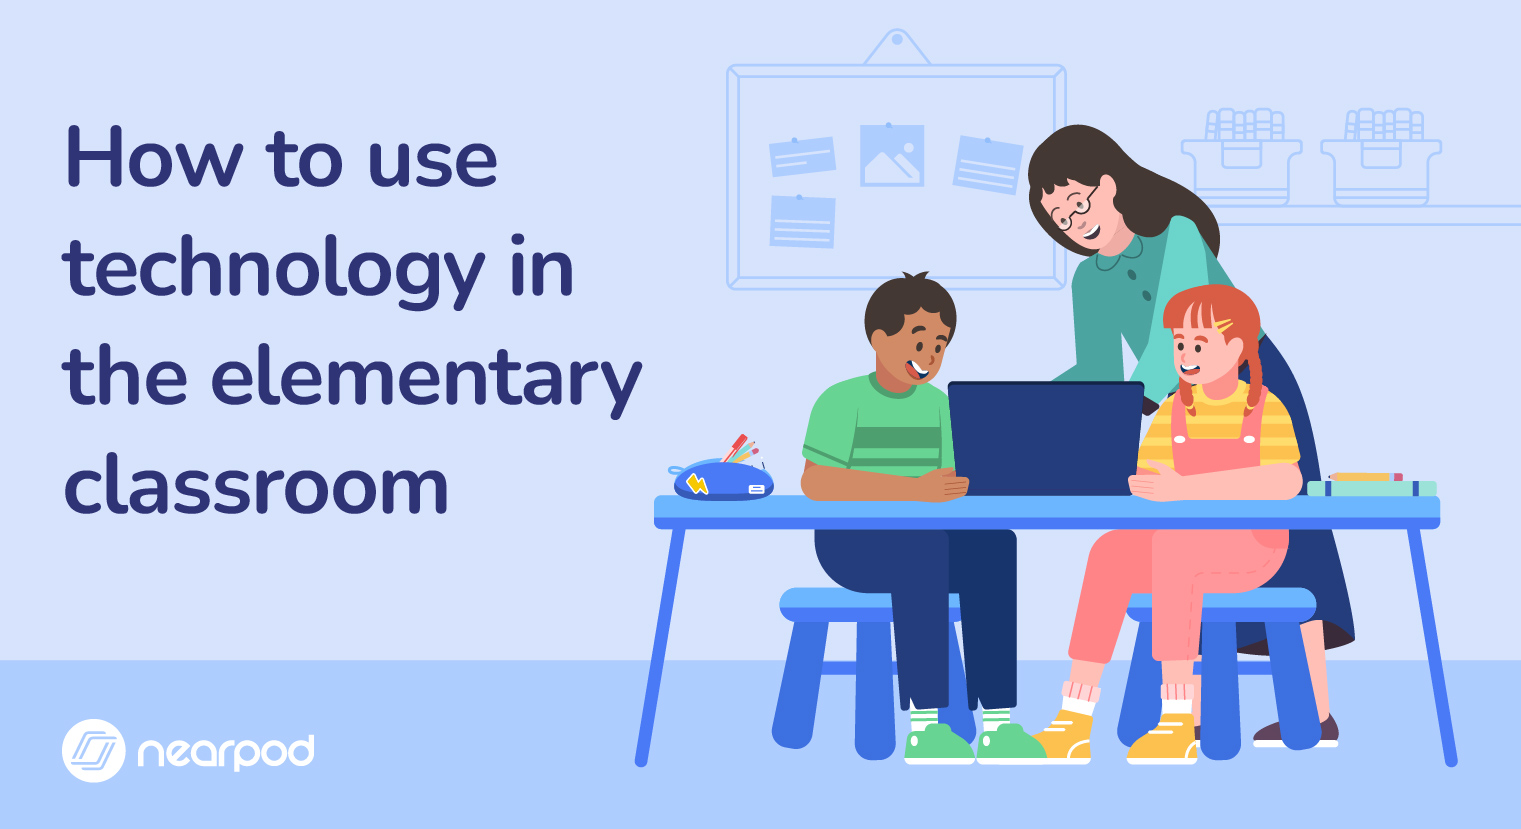 How to use technology in the elementary classroom blog image